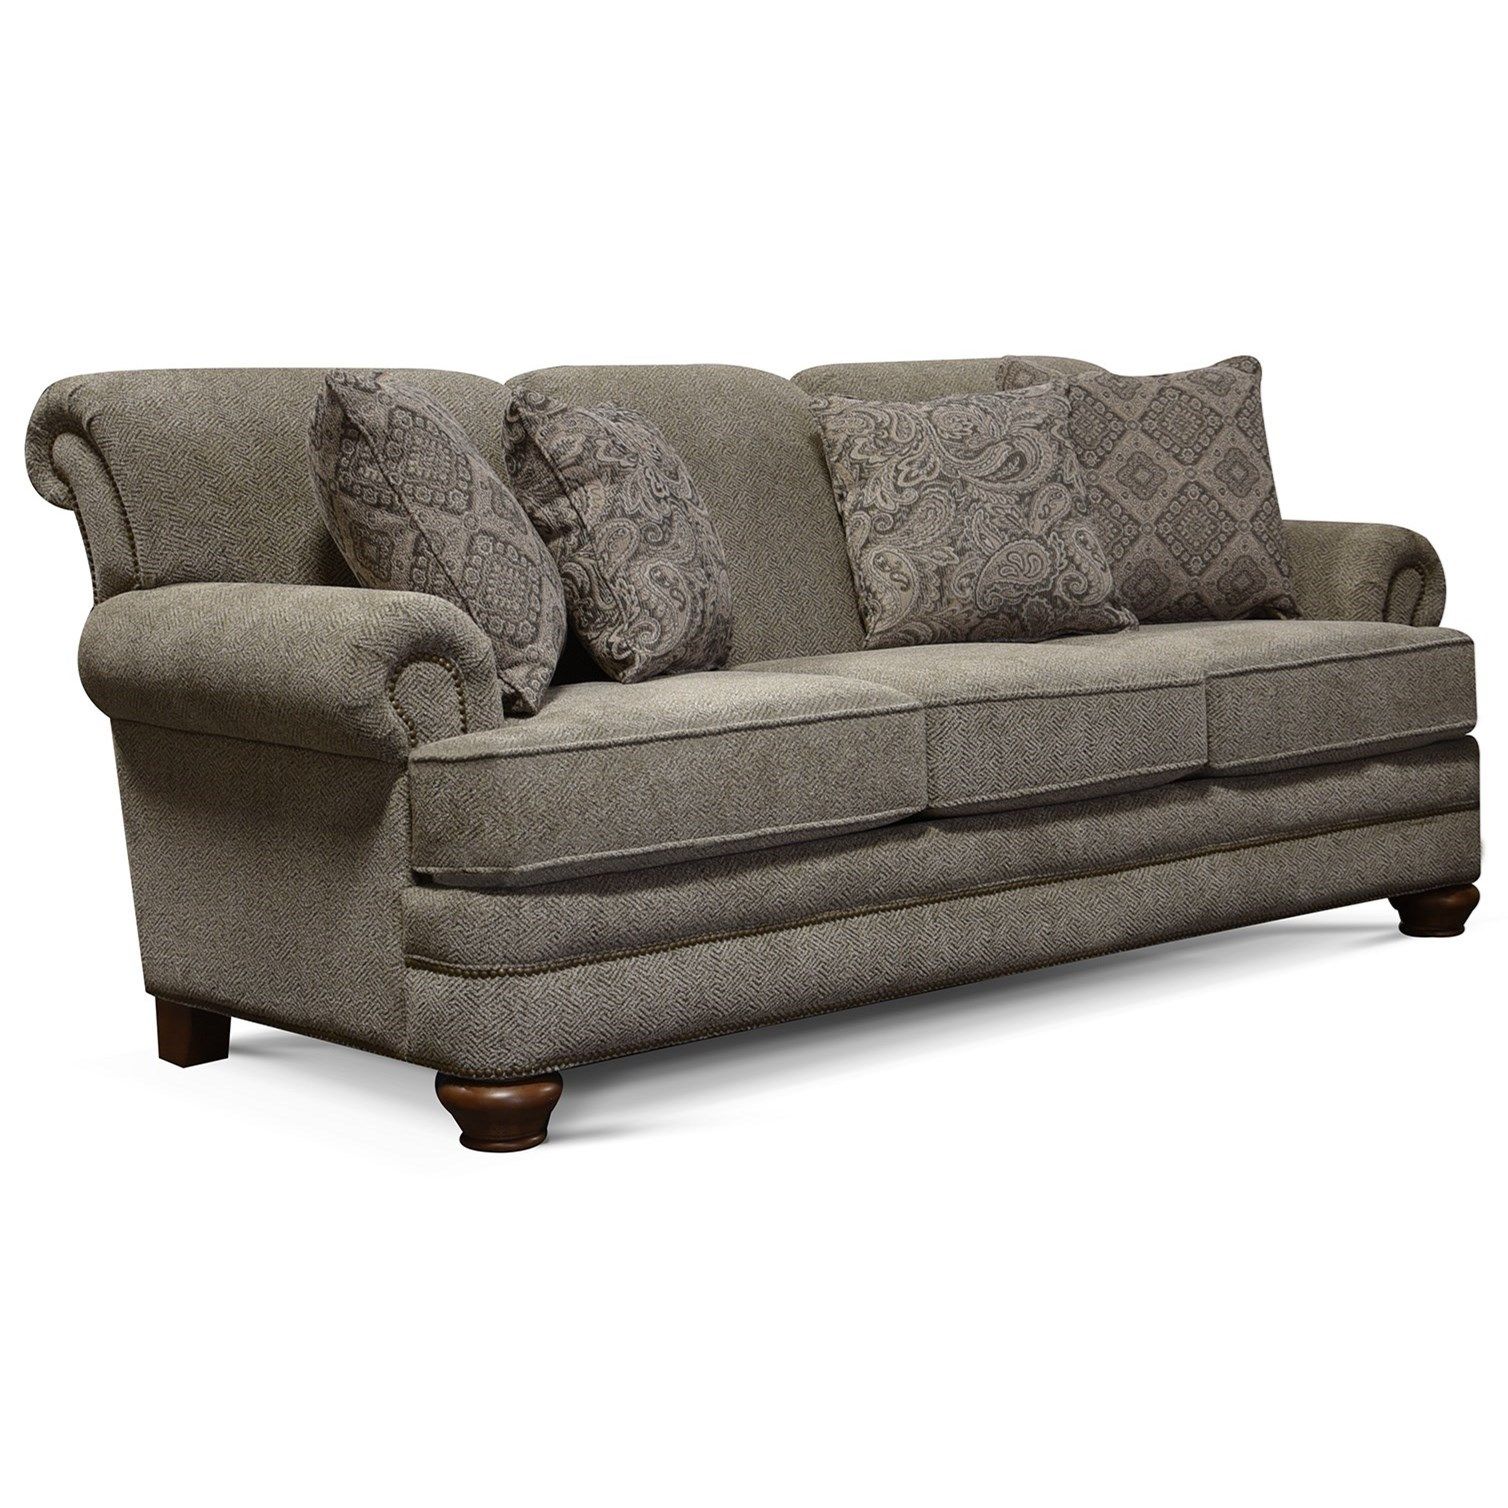 England 5q00/n Series Traditional Sofa With Nailhead Trim | Superstore |  Uph – Stationary Sofas Throughout Sofas With Nailhead Trim (Photo 5 of 15)